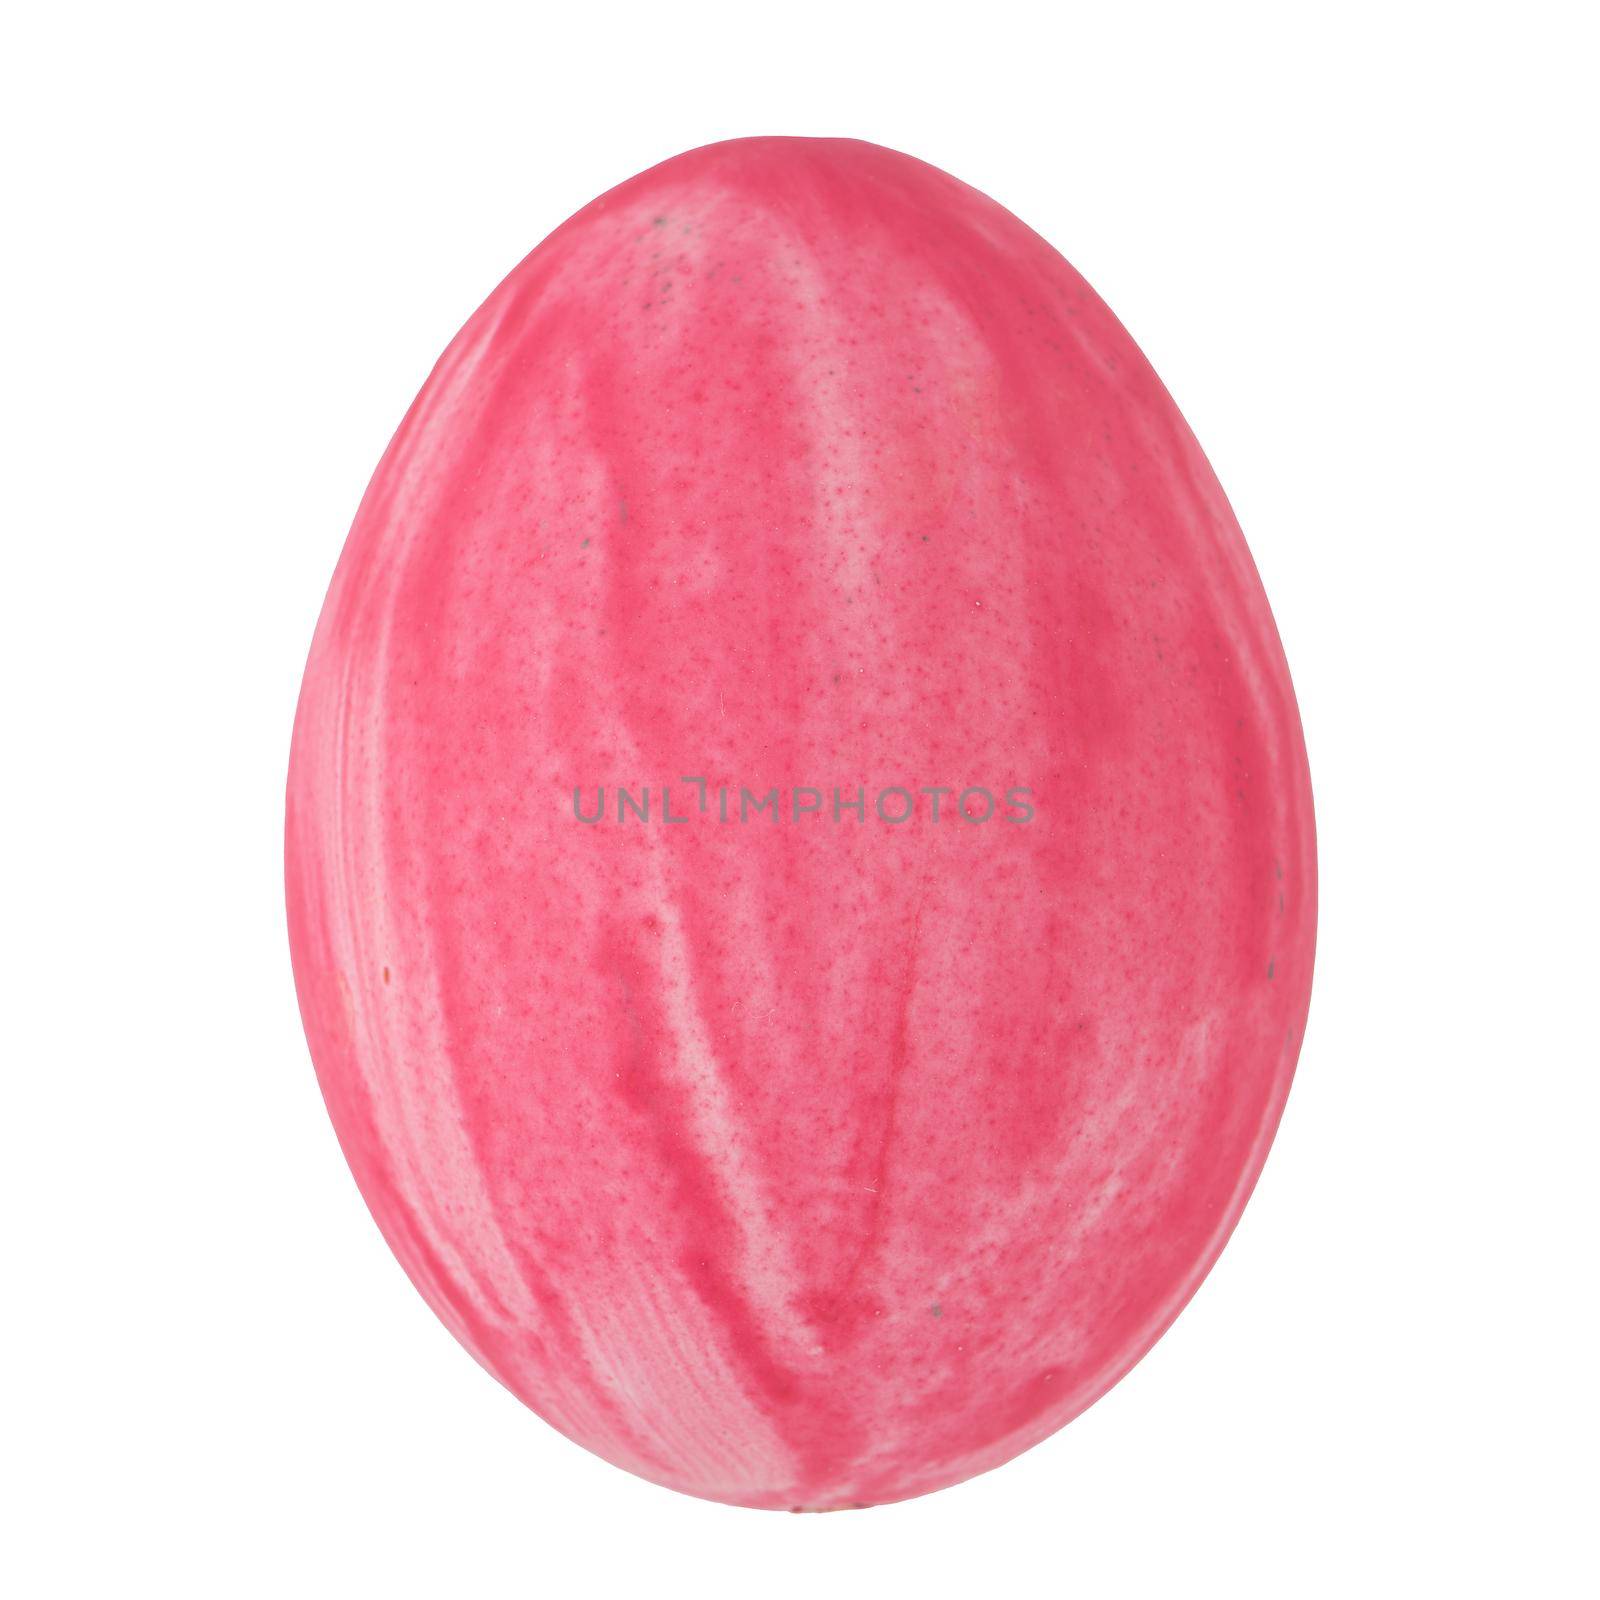 Pink painted egg isolated on white background.